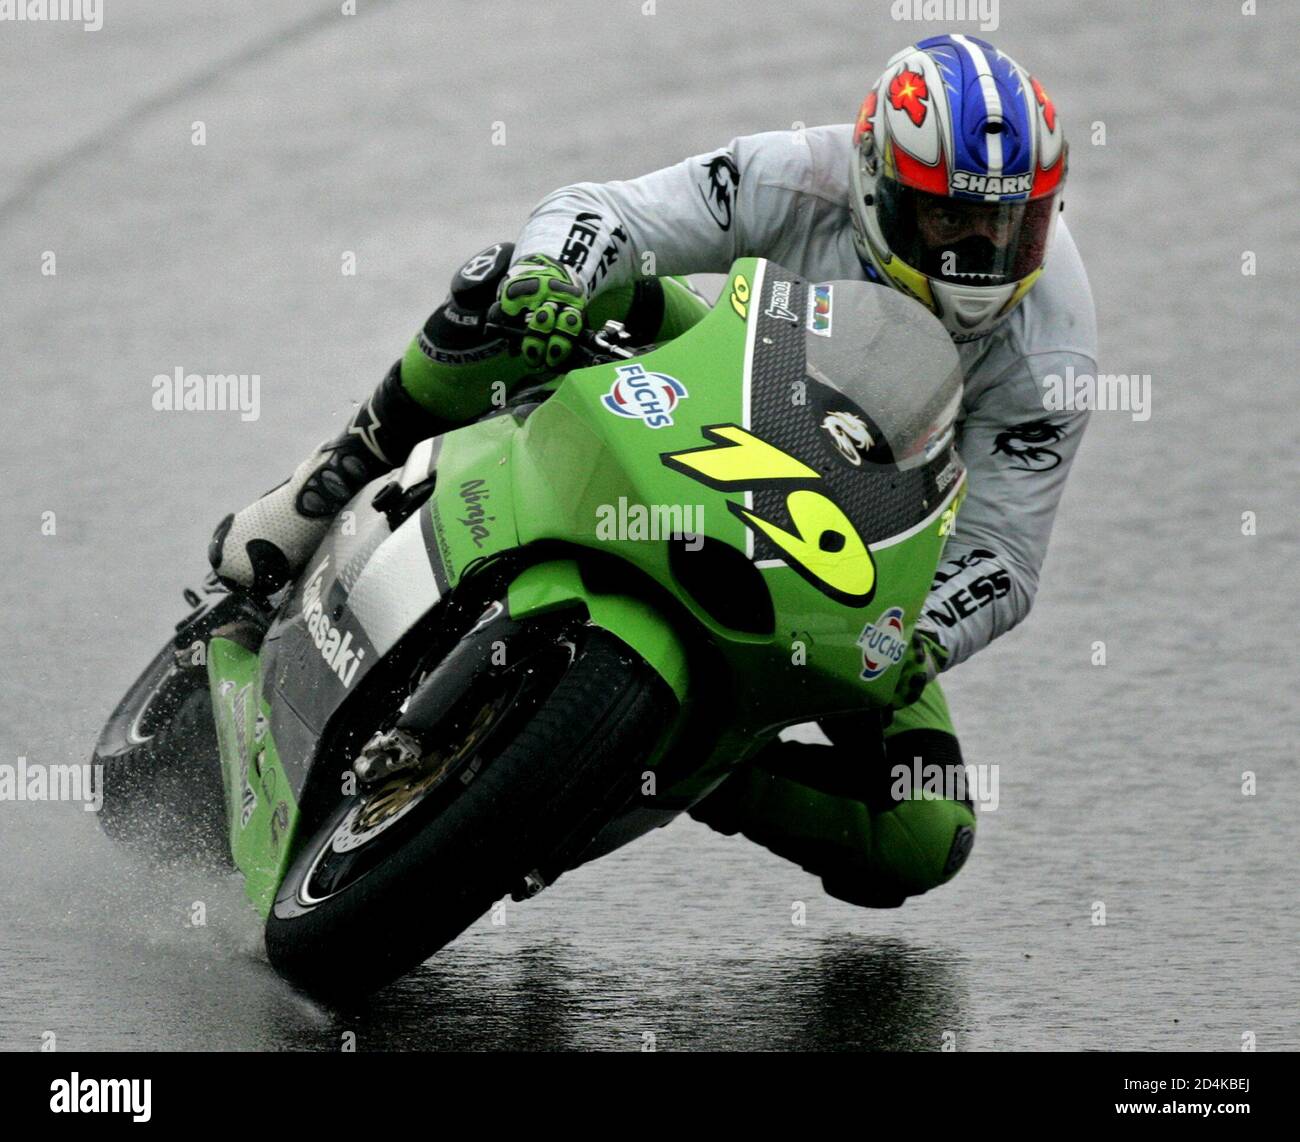 Overholdelse af Enkelhed Ekspedient Frenchman Oliver Jacque (No 19) from the Kawasaki Racing Team, rides in  heavy rain during the MotoGP race at the Shanghai International circuit  after the first ever MotoGP Grand Prix of China,